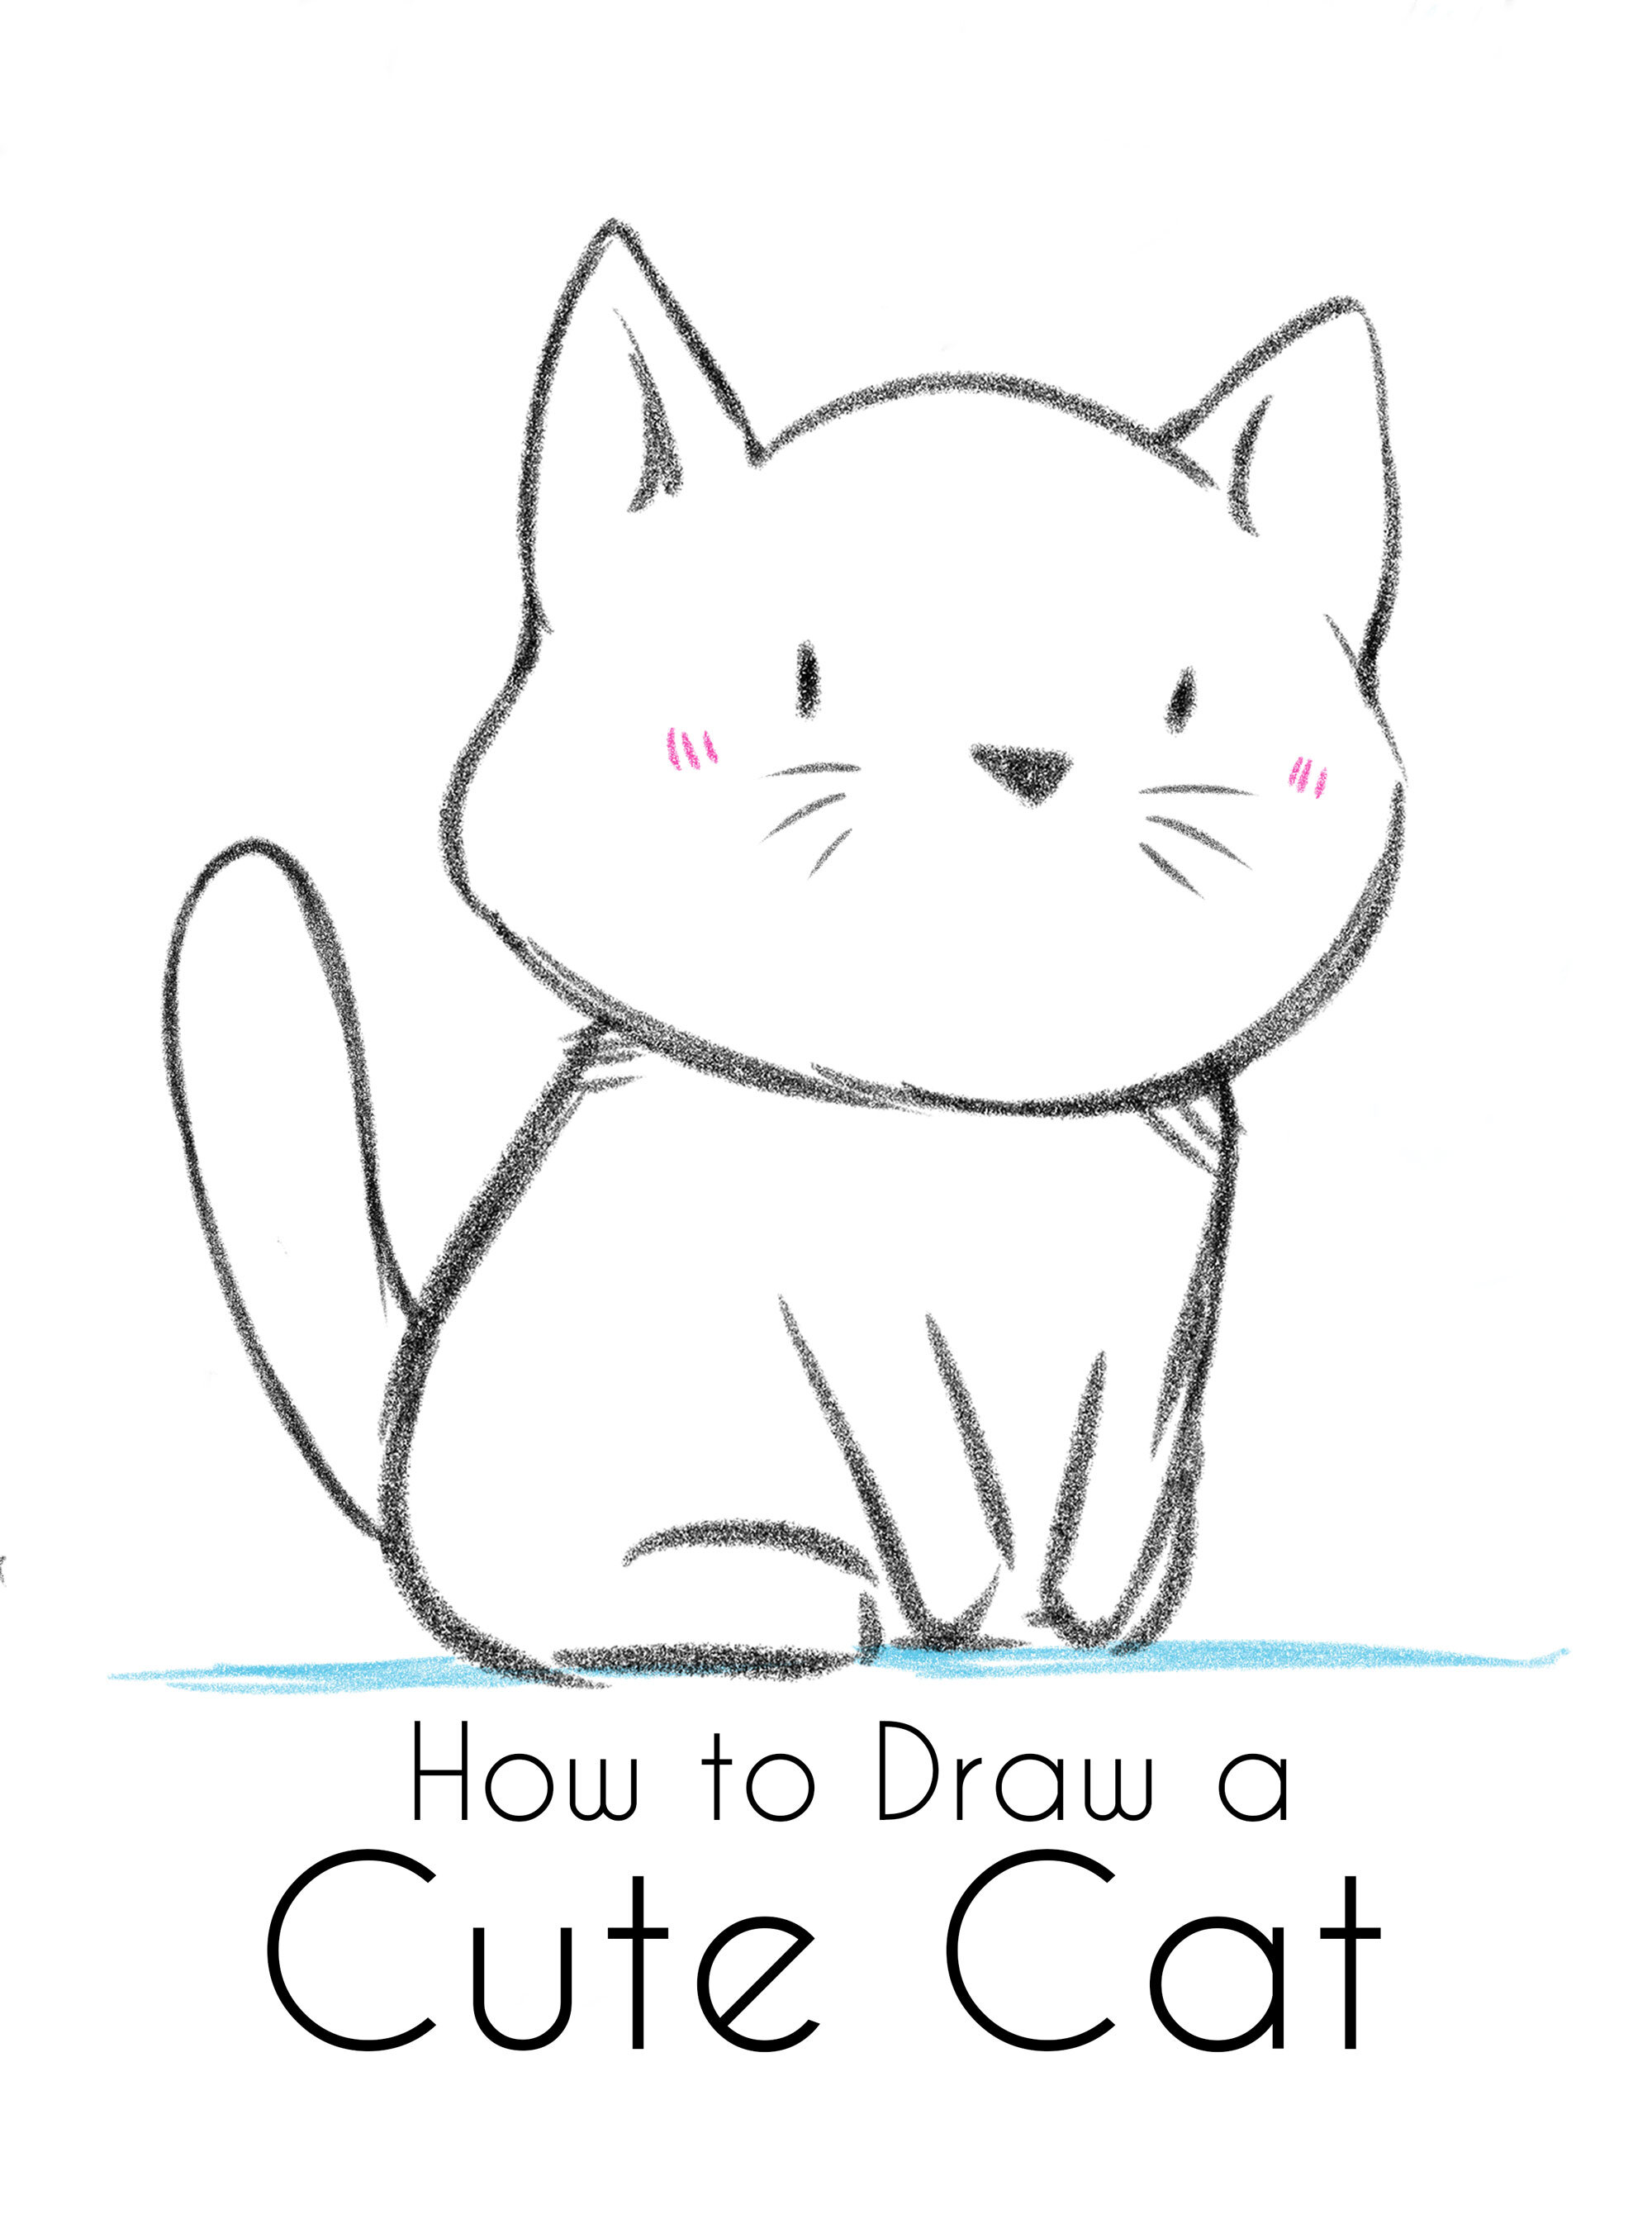 How to Draw a Cute Cat - Easy Step by Step Tutorial for Beginners ...